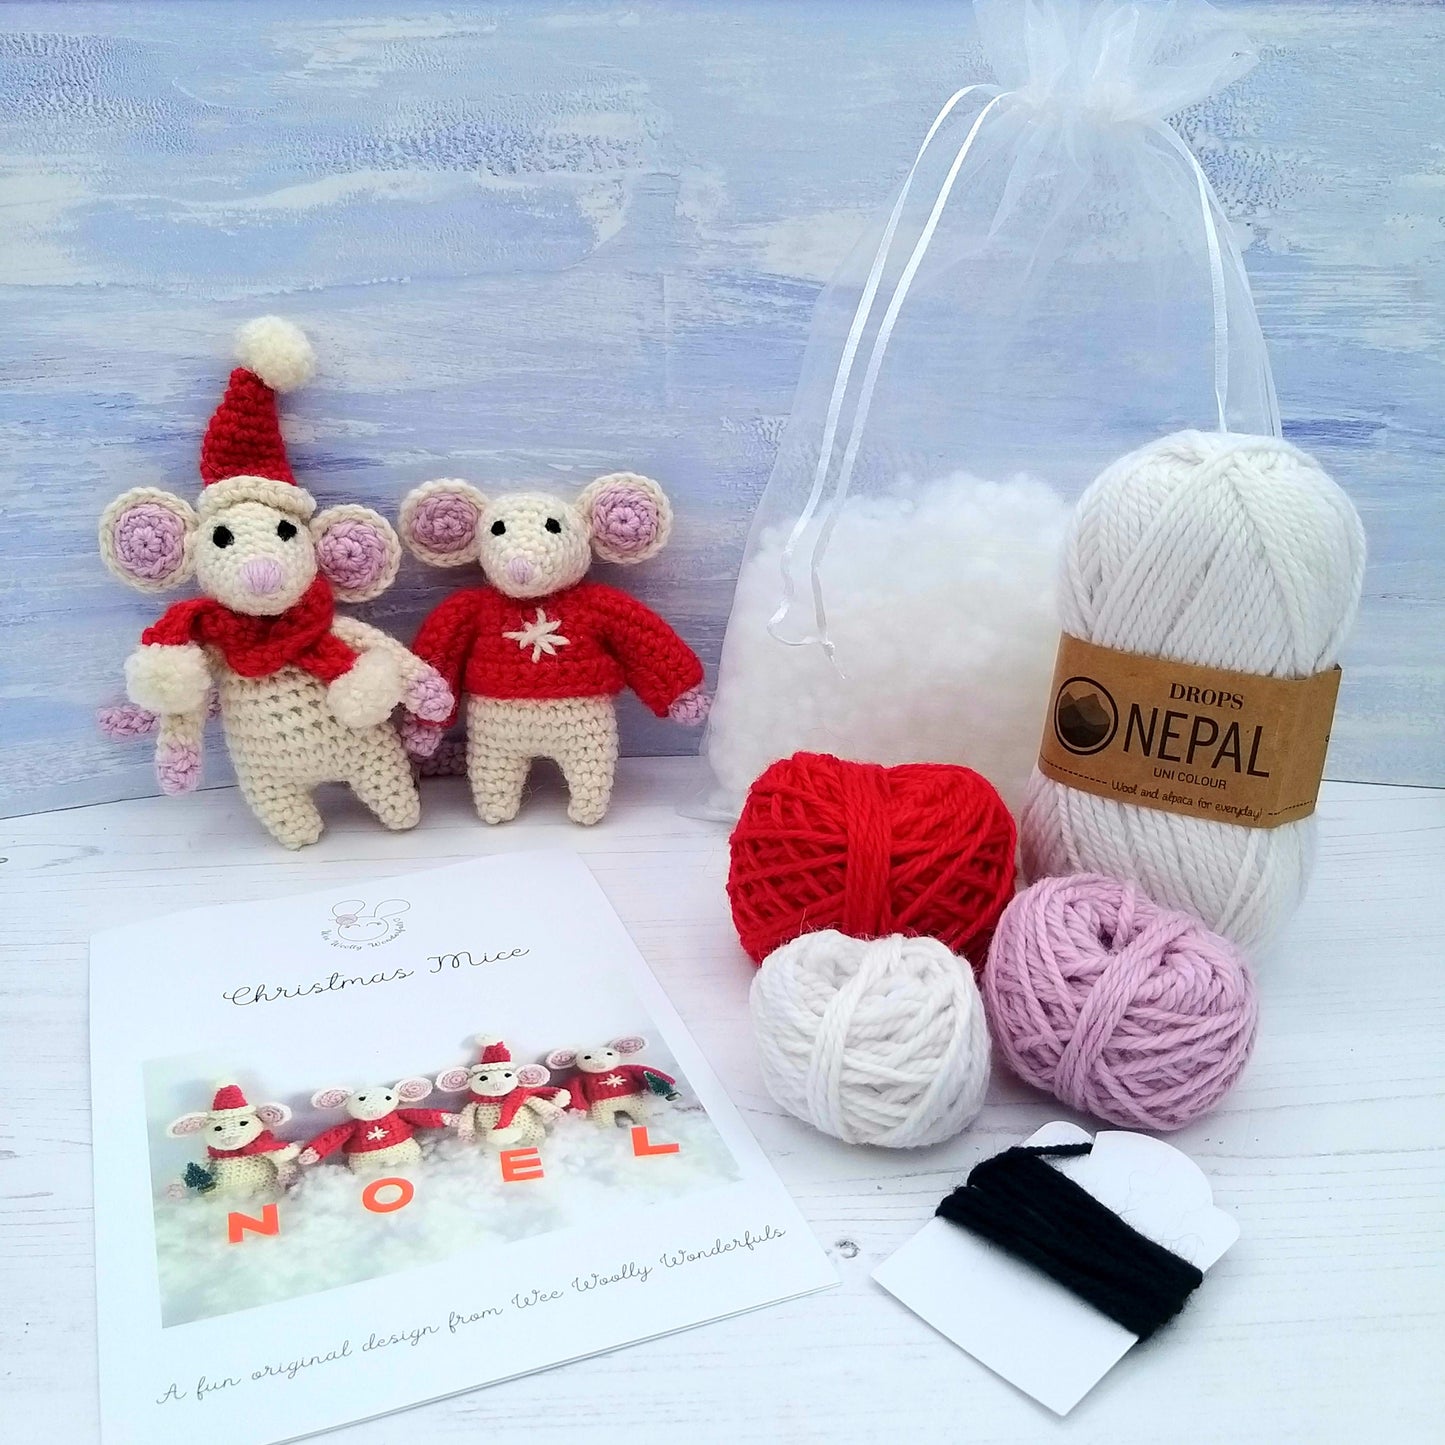 Crochet KIt Contents for White Mice - wool colours white, red and pink